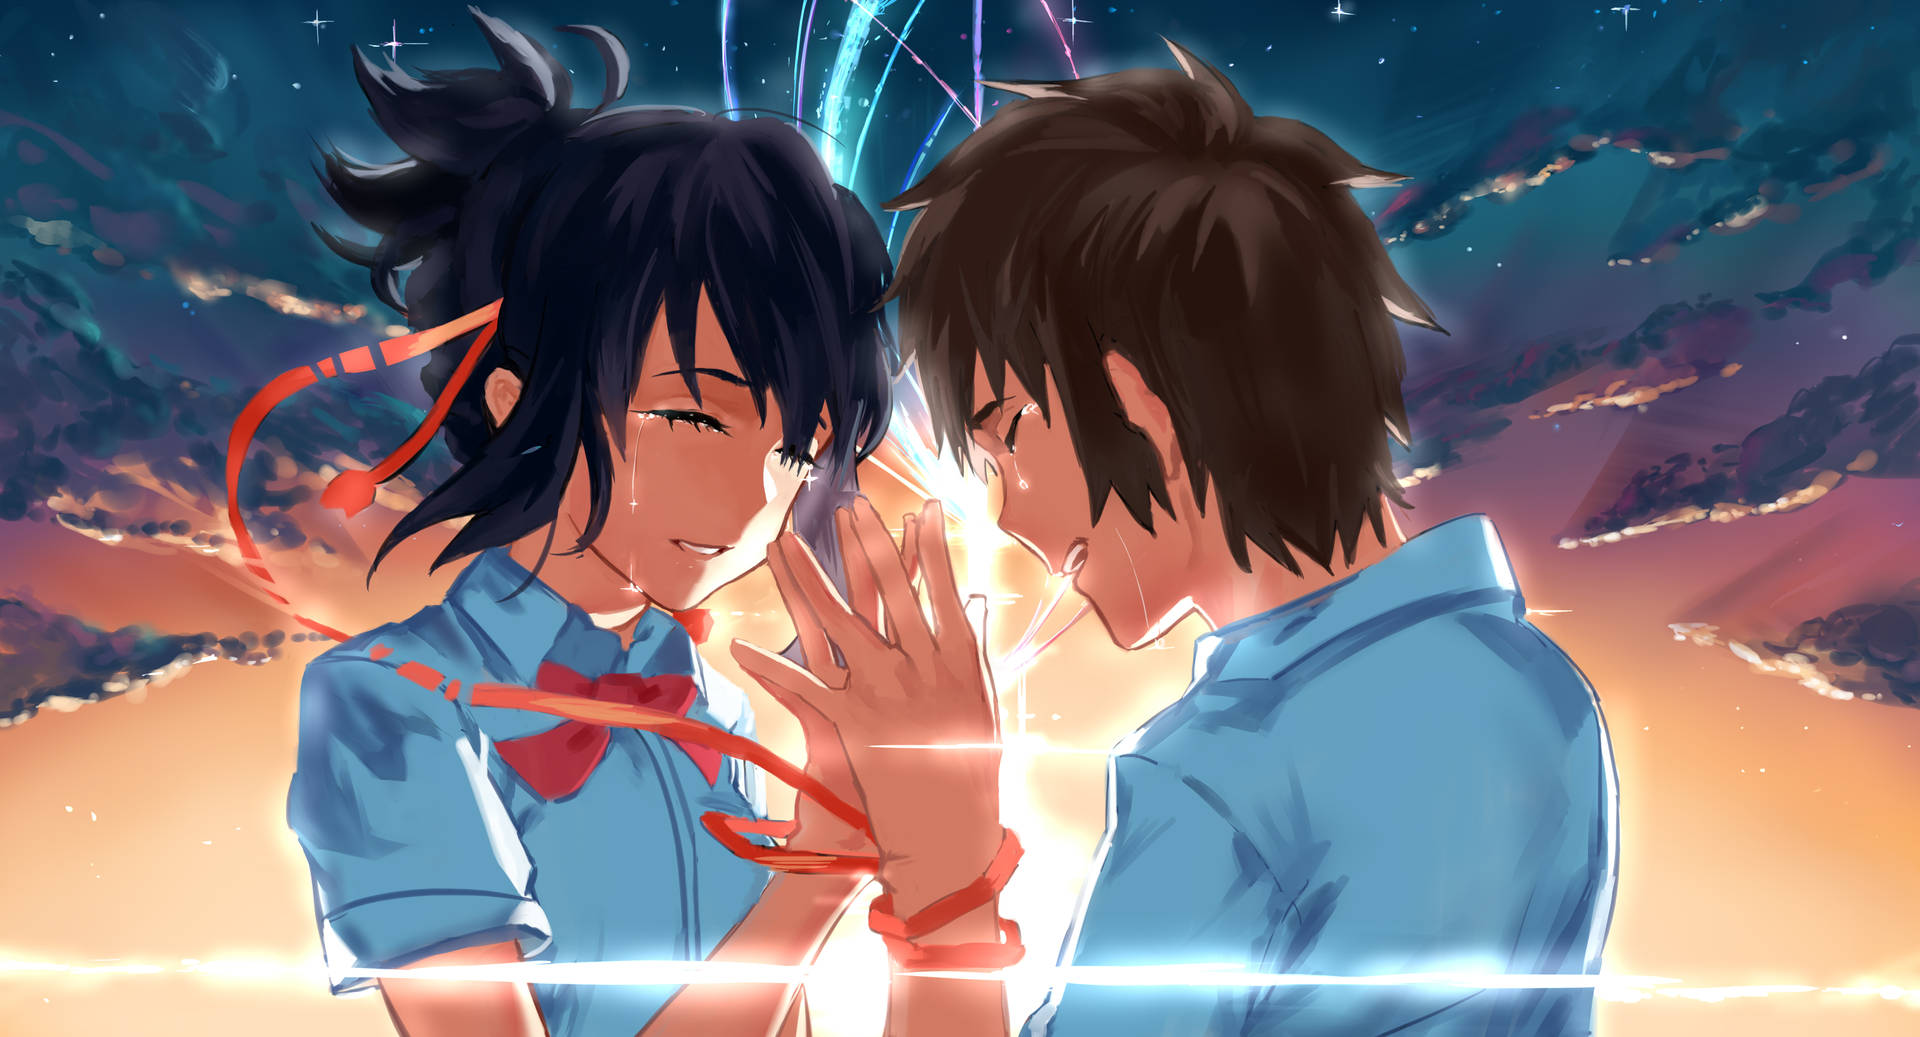 An Emotional Moment Between Taki & Mitsuha in 'Your Name' 4K Wallpaper